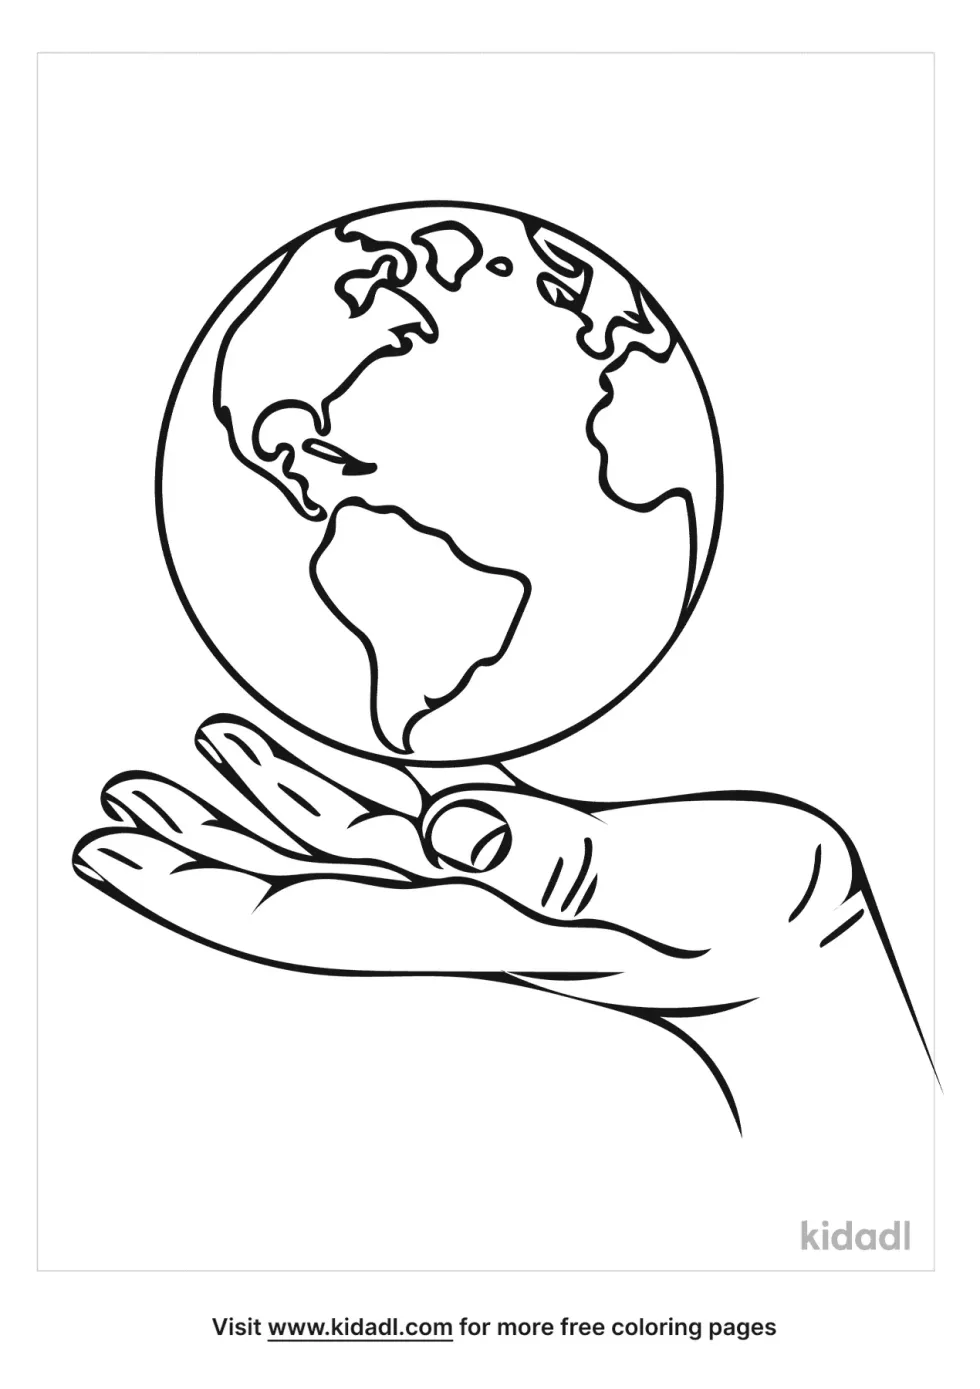 Earth In Hands Coloring Page